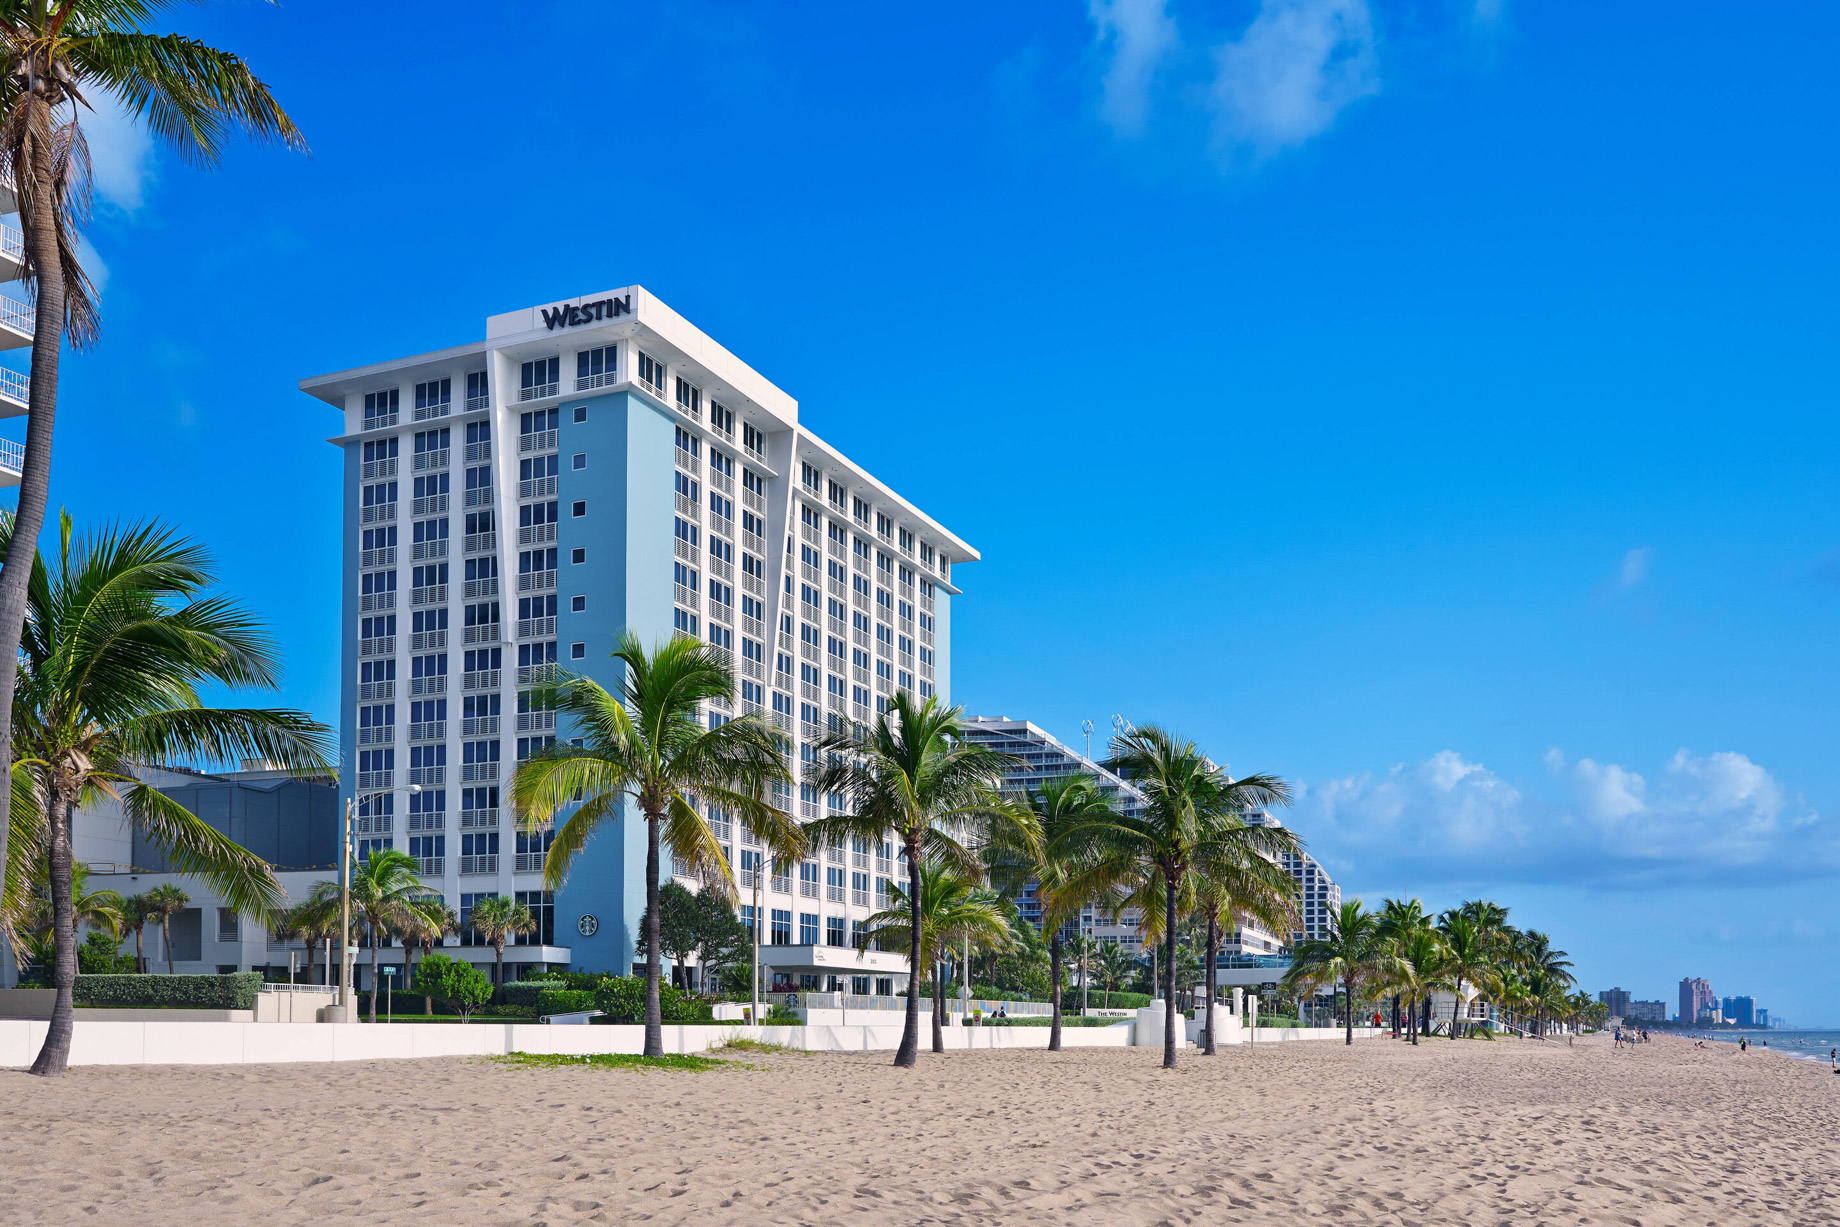 Five of the Best Hotels to Stay in While Attending the Fort Lauderdale International Boat Show – Westin Fort Lauderdale Beach Resort